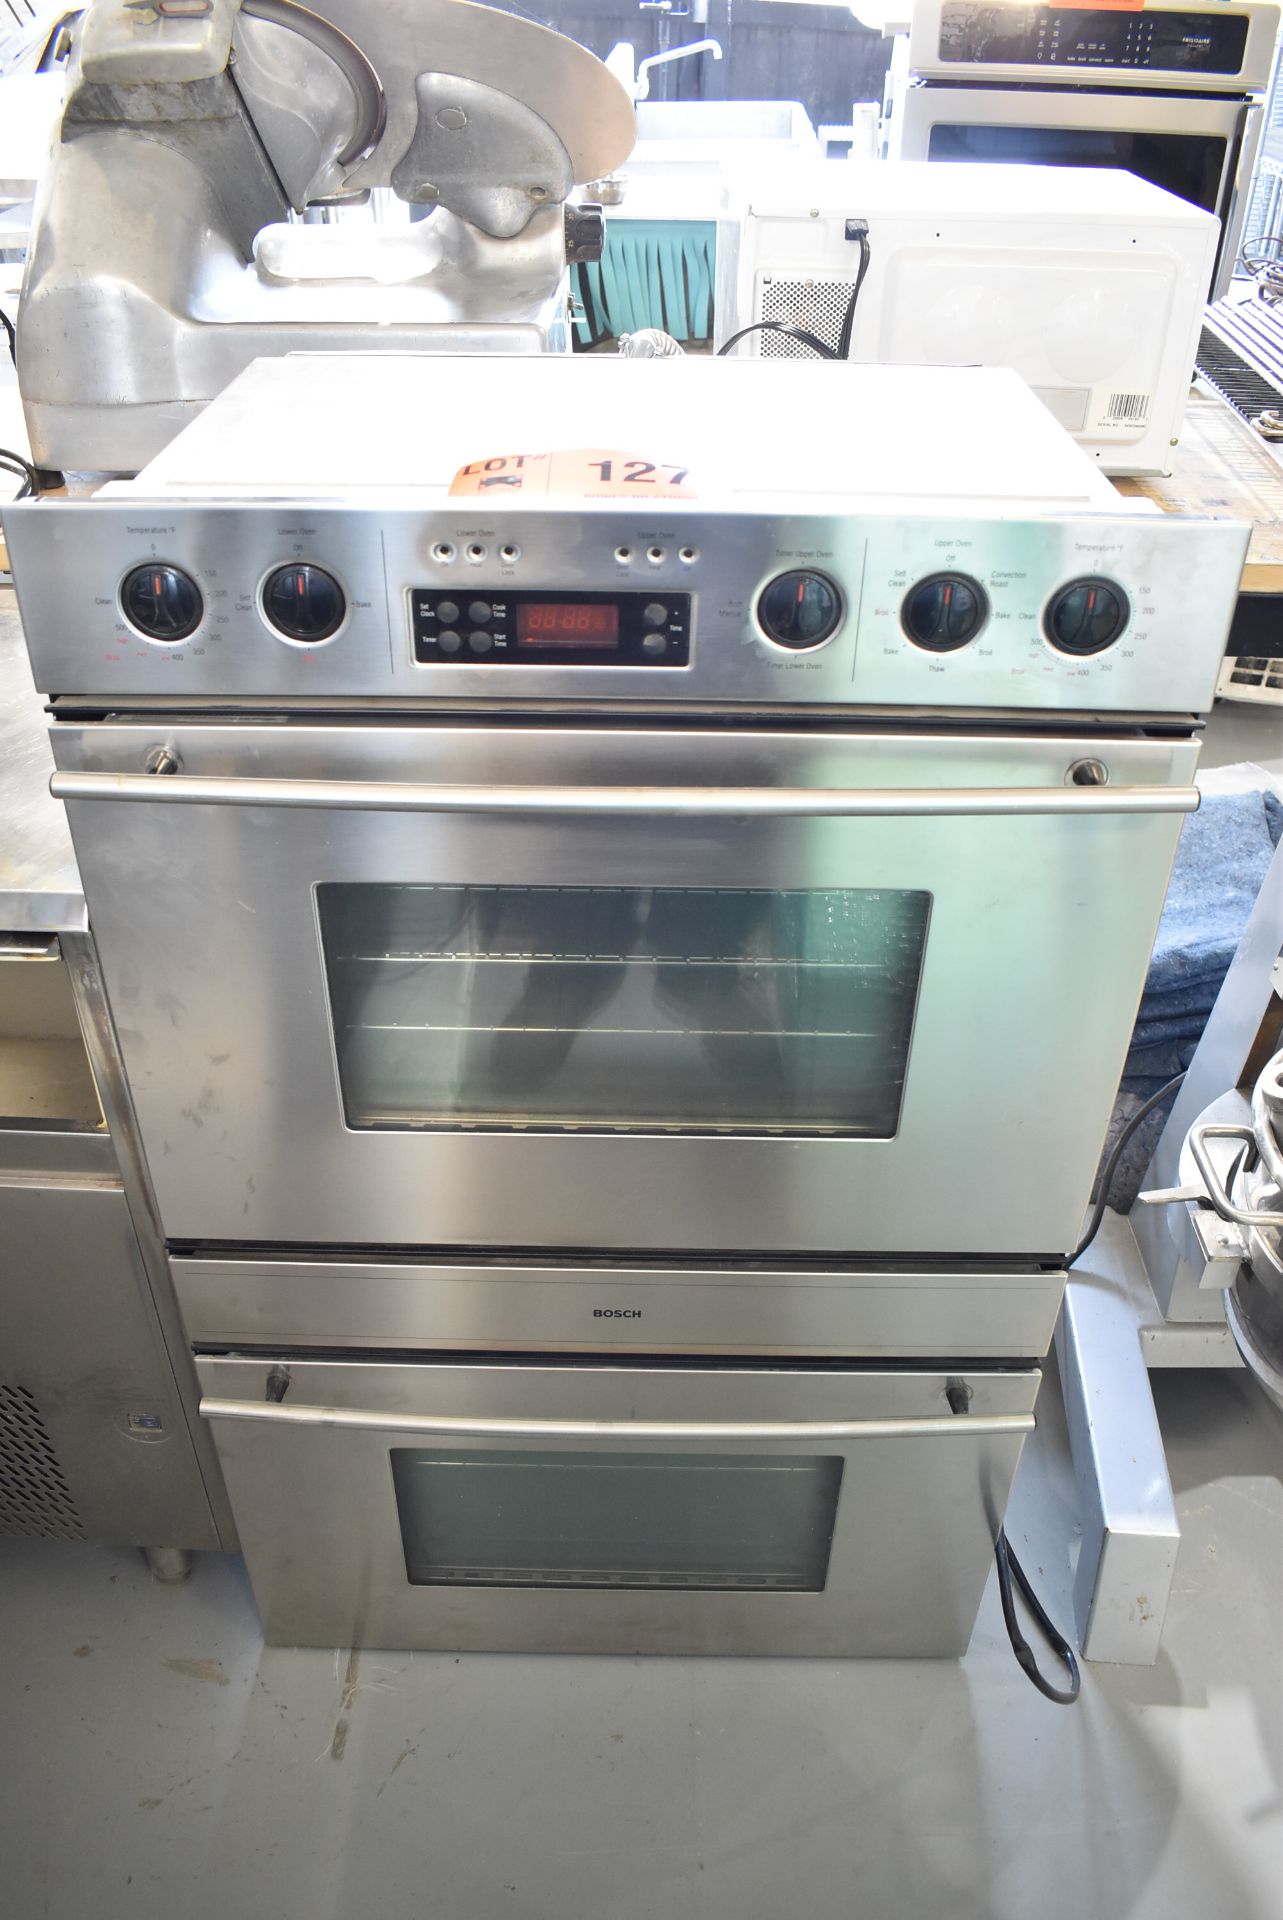 BOSCH HBL 655 A UC ELECTRIC OVEN, S/N FD8009 111736 [RIGGING FEES FOR LOT #127 - $50 CAD PLUS